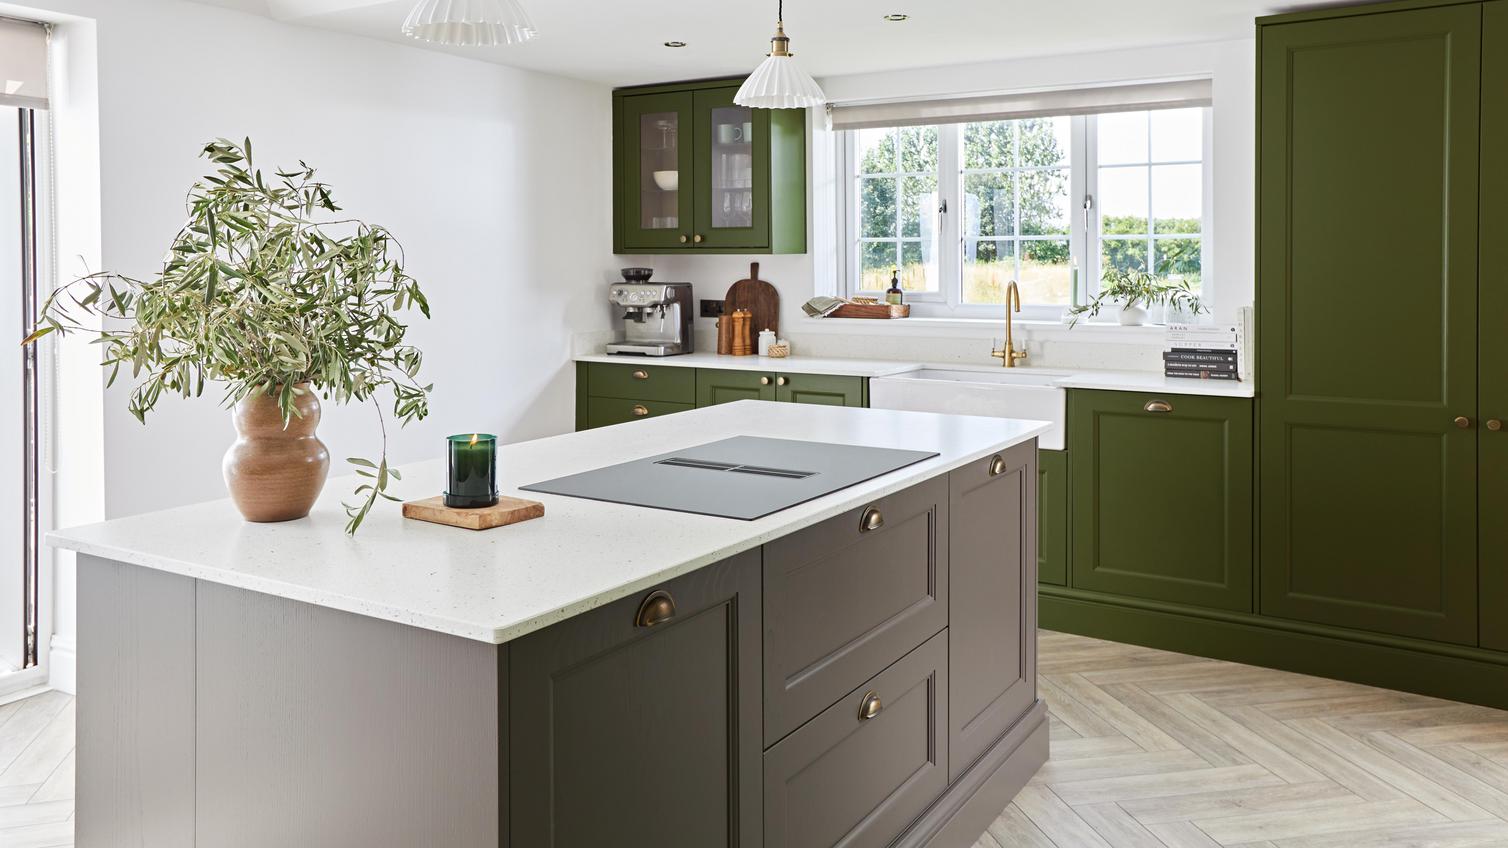 An olive green shaker kitchen with a truffle brown kitchen island. There are white bespoke worktops and brass handles.